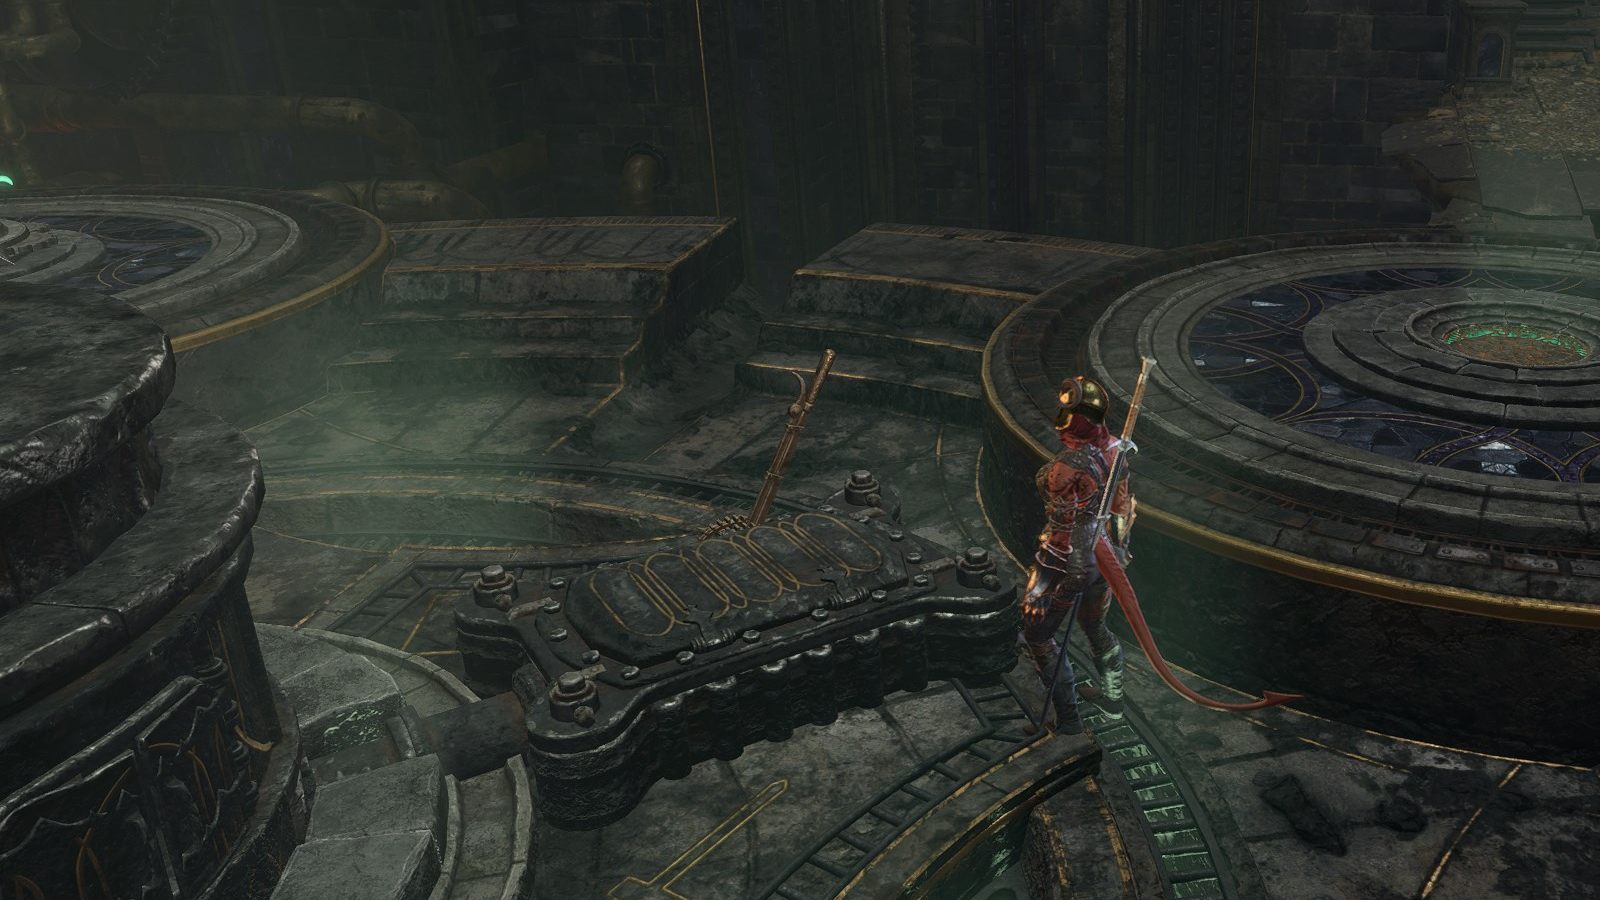 Karlach standing over the mould chamber on the Adamantine Forge in Baldur’s Gate 3.